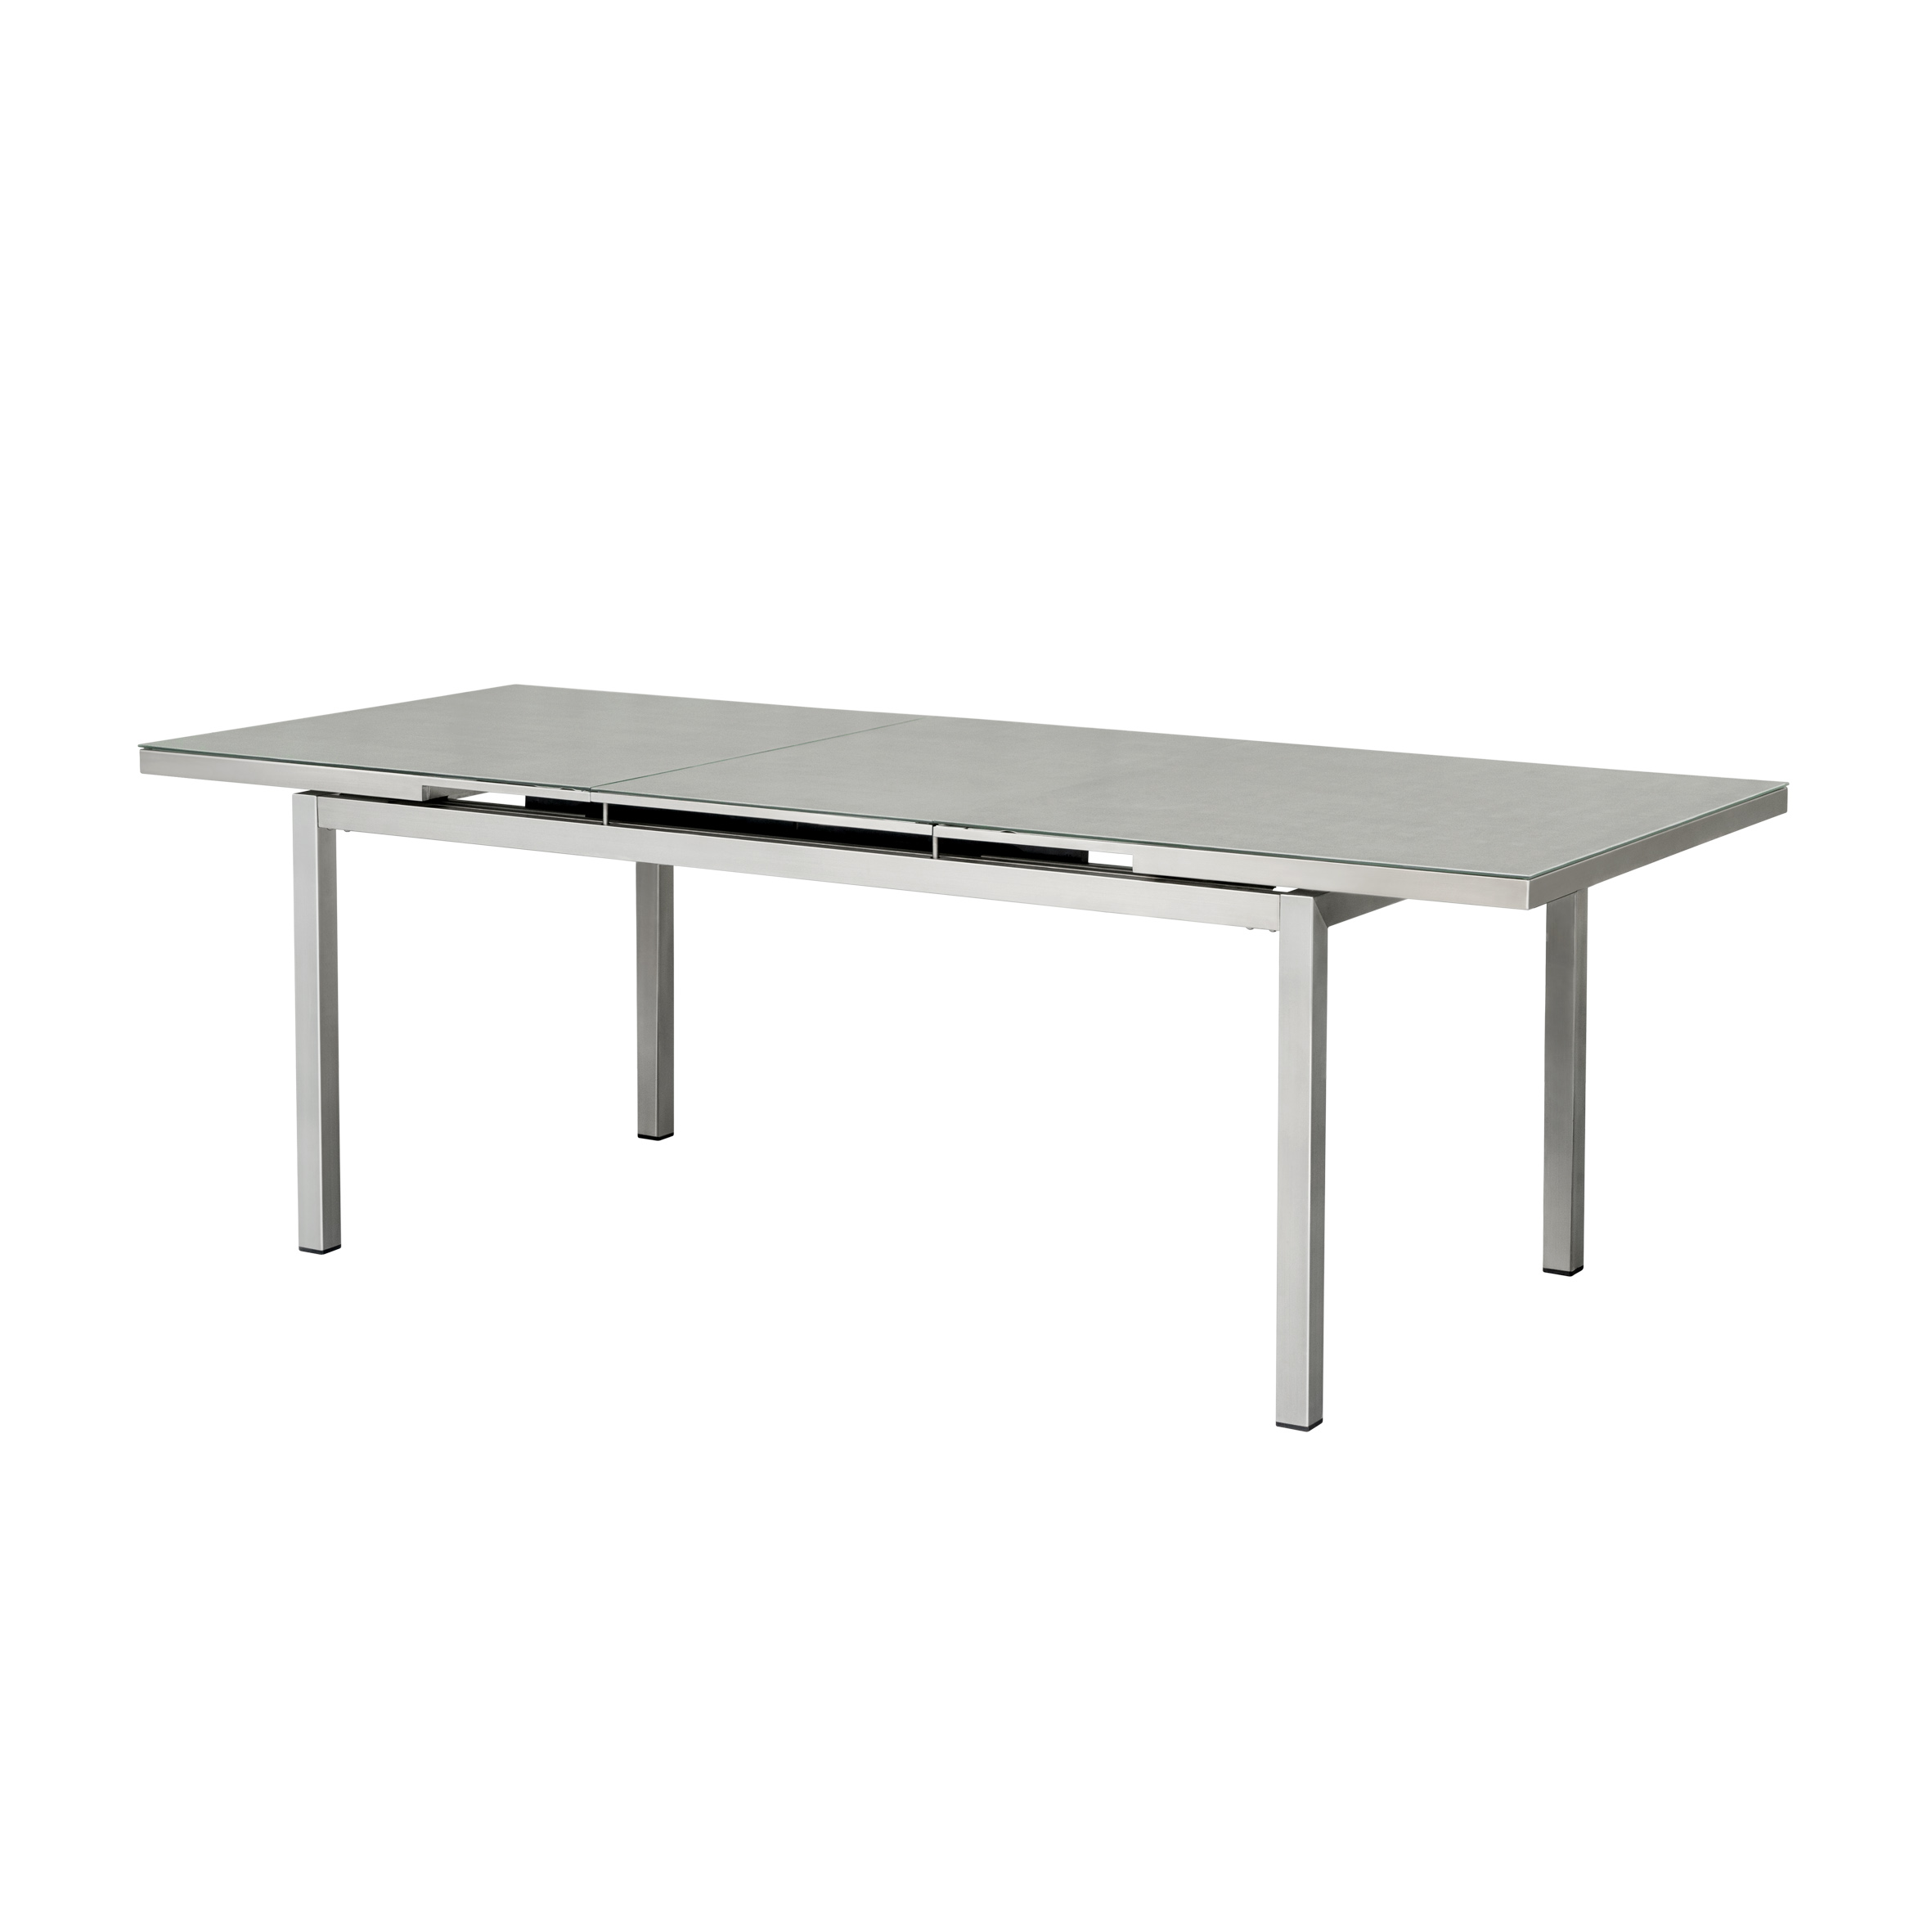 Rio auto. extension table (Stone tempered glass) Featured Image